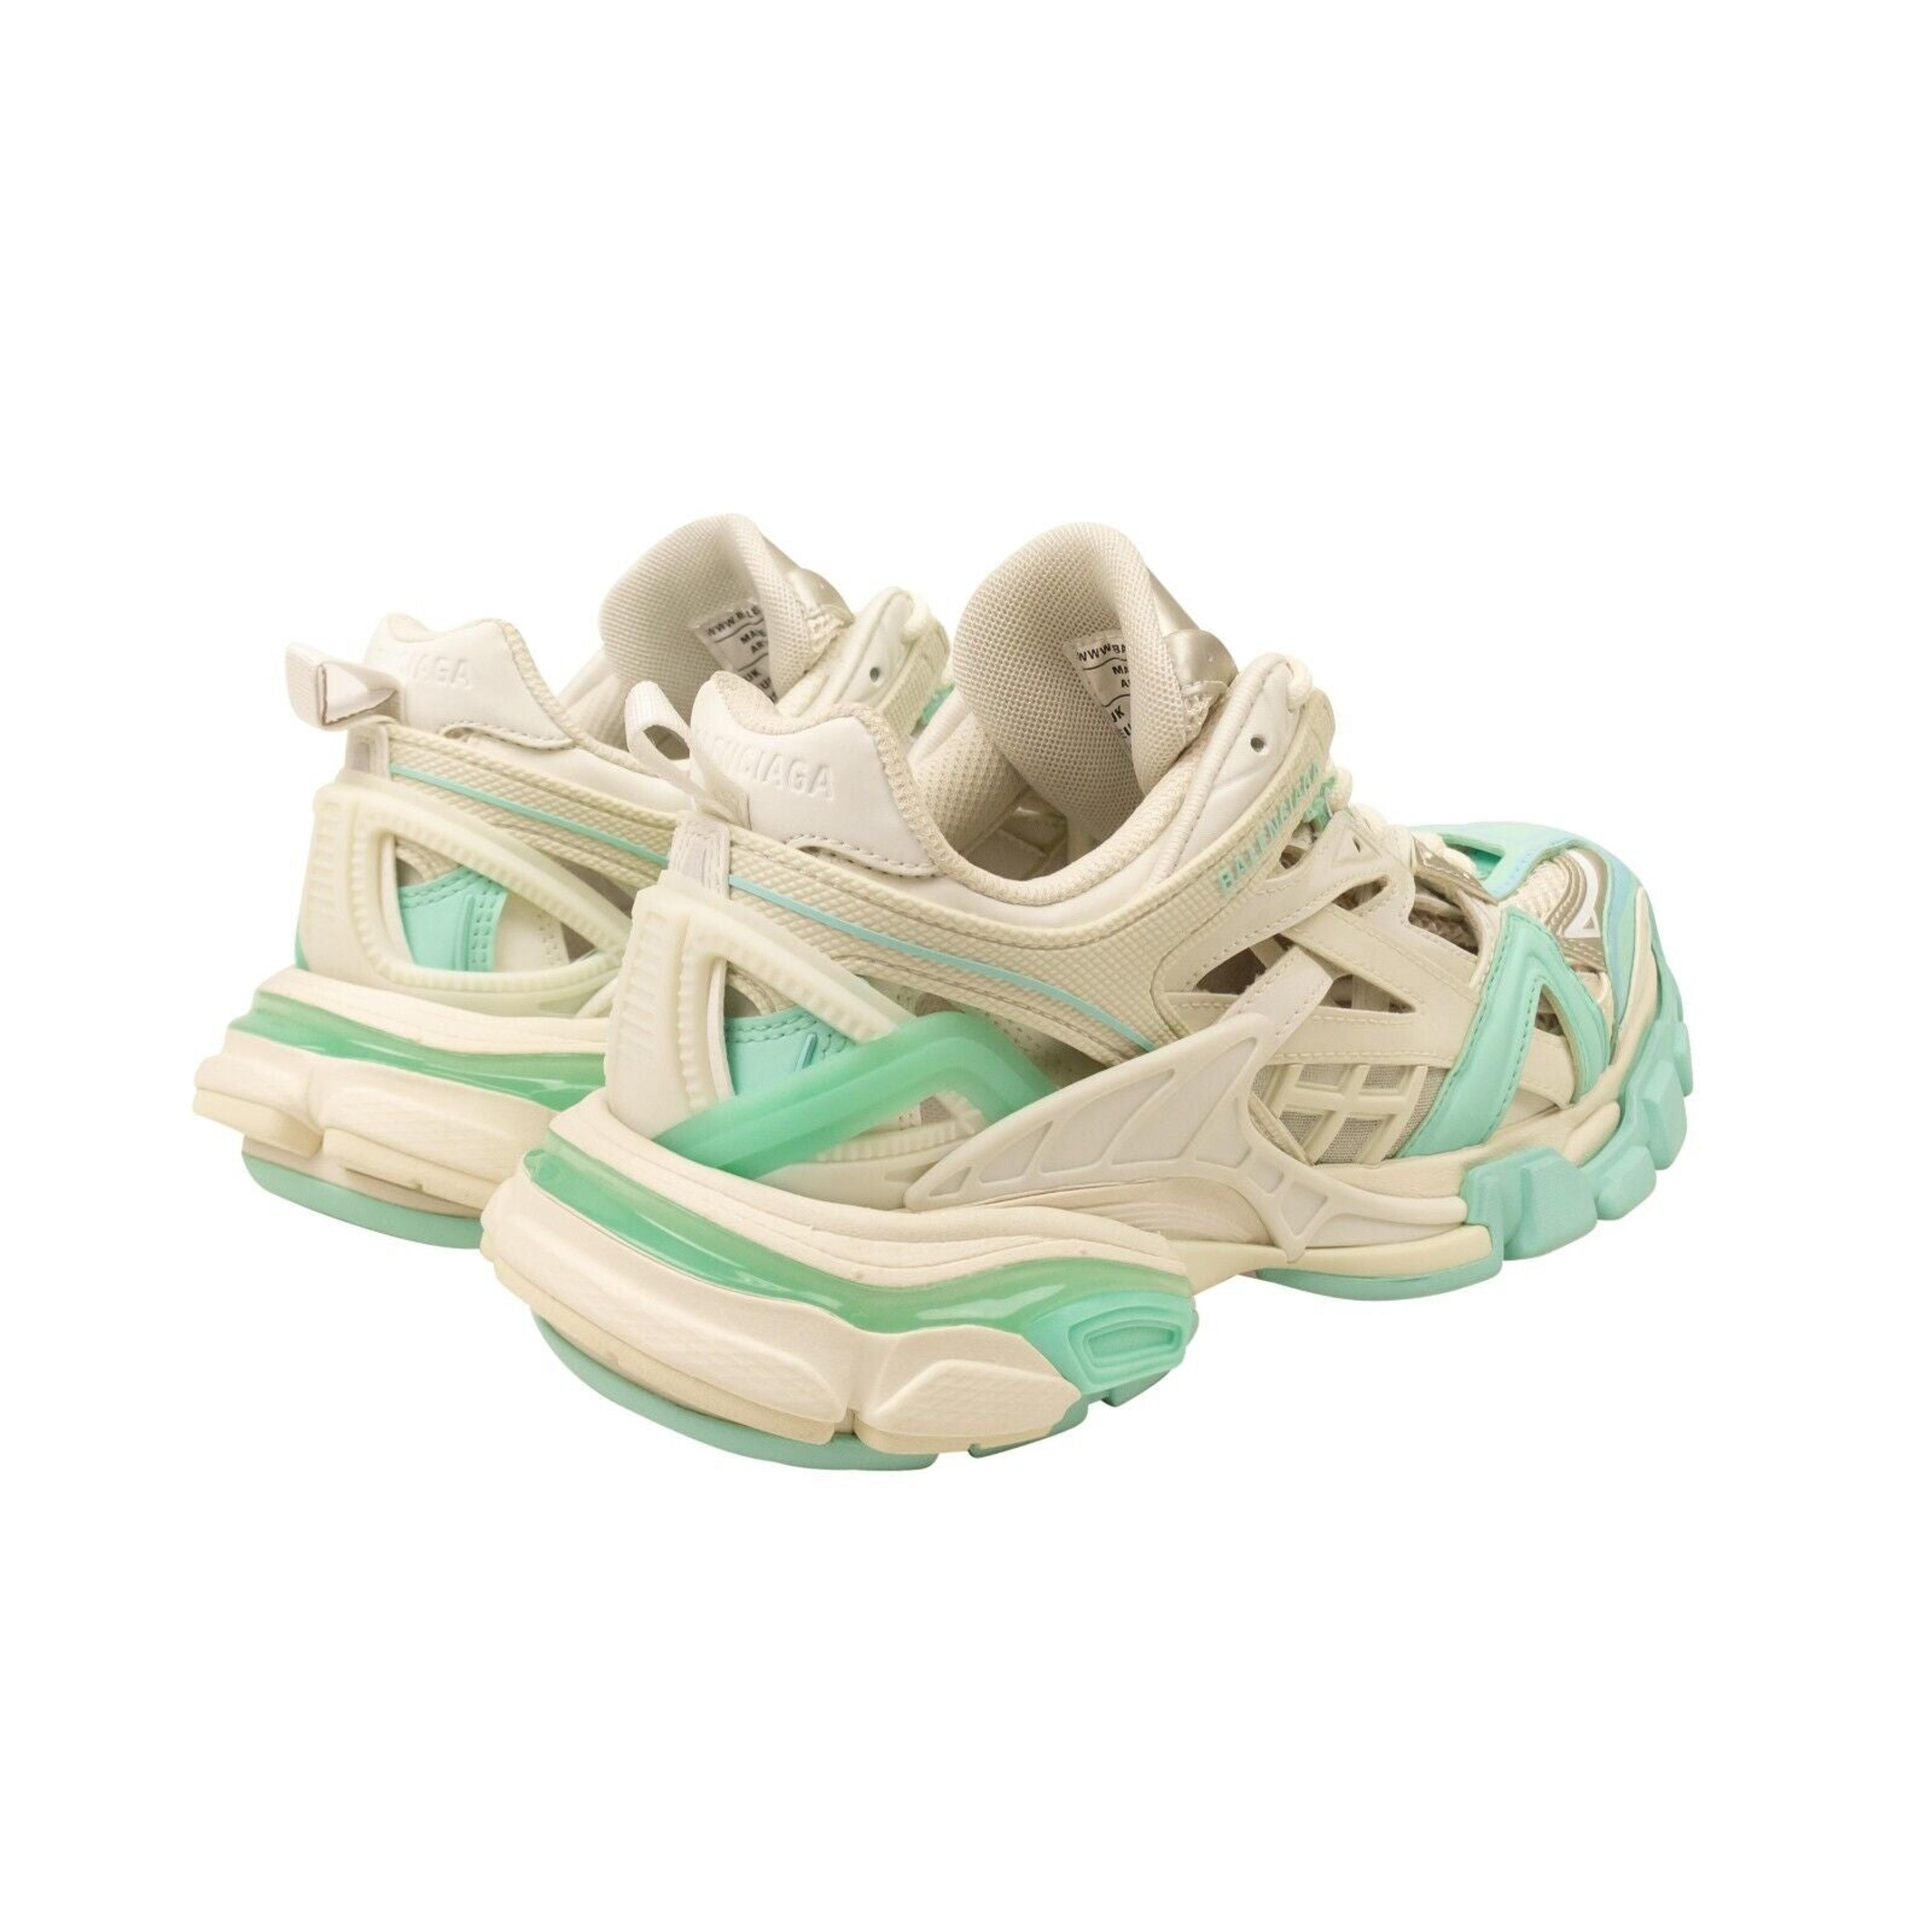 Alternate View 3 of Women's White And Green Track 2 Sneakers